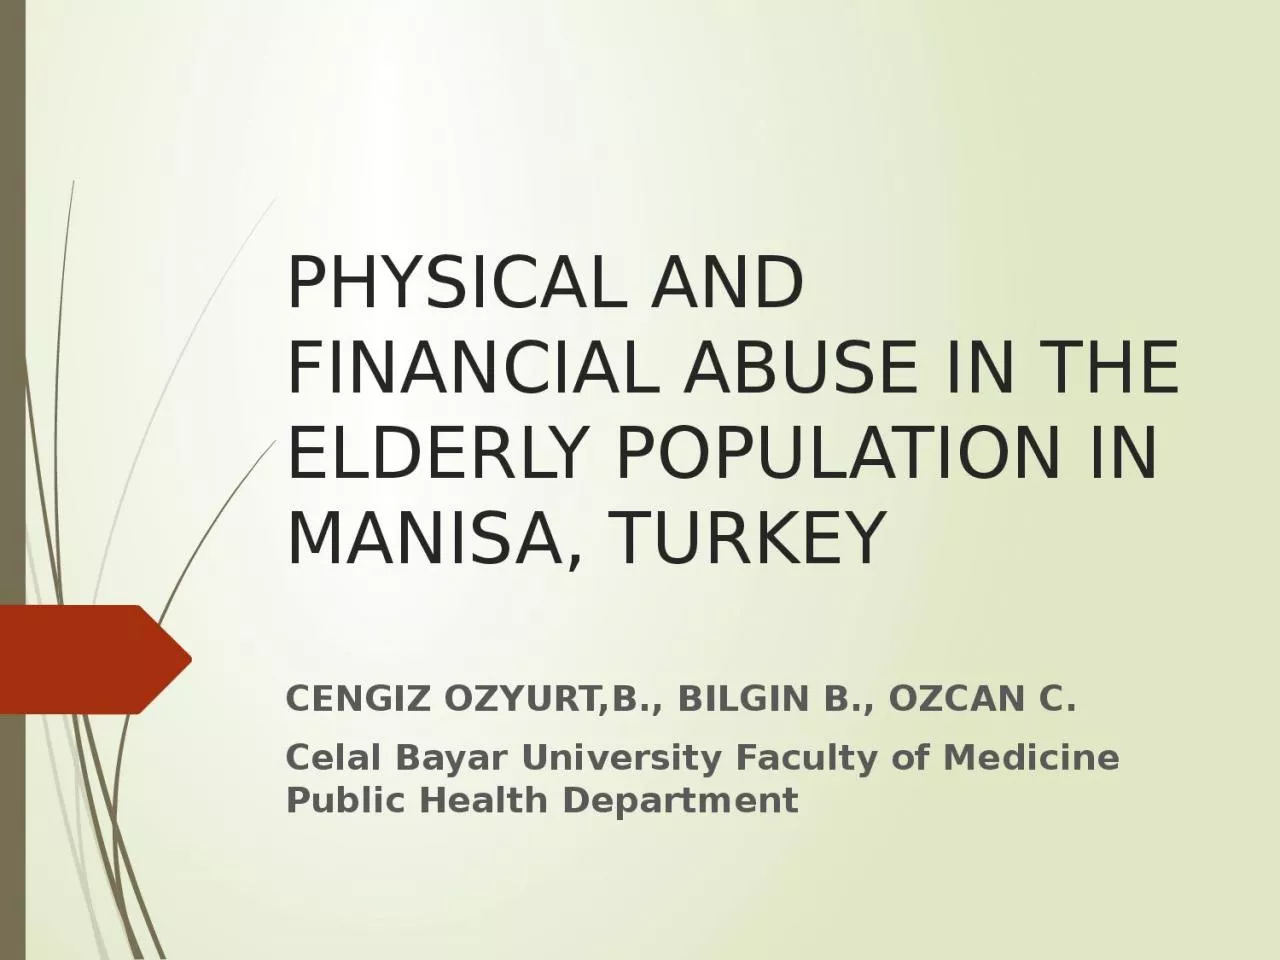 PHYSICAL AND  FINANCIAL ABUSE IN THE ELDERLY POPULATION IN MANISA, TURKEY